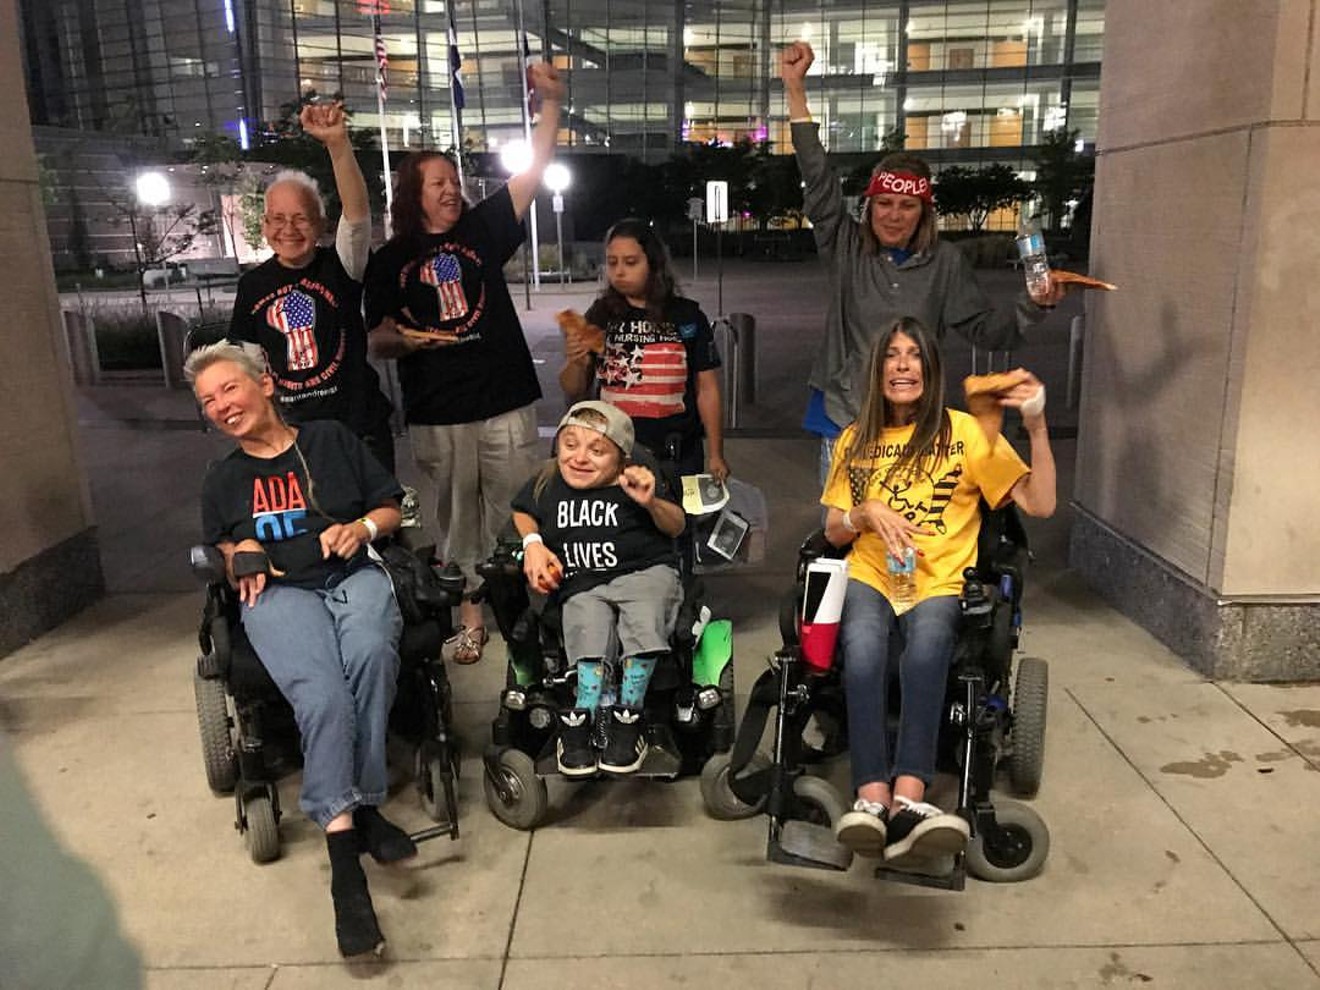 ADAPT shut down Senator Cory Gardner's office for three days last week, demanding he vote against the Republican repeal of the Affordable Care Act. In the center of this photo is Kalyn Heffernan.